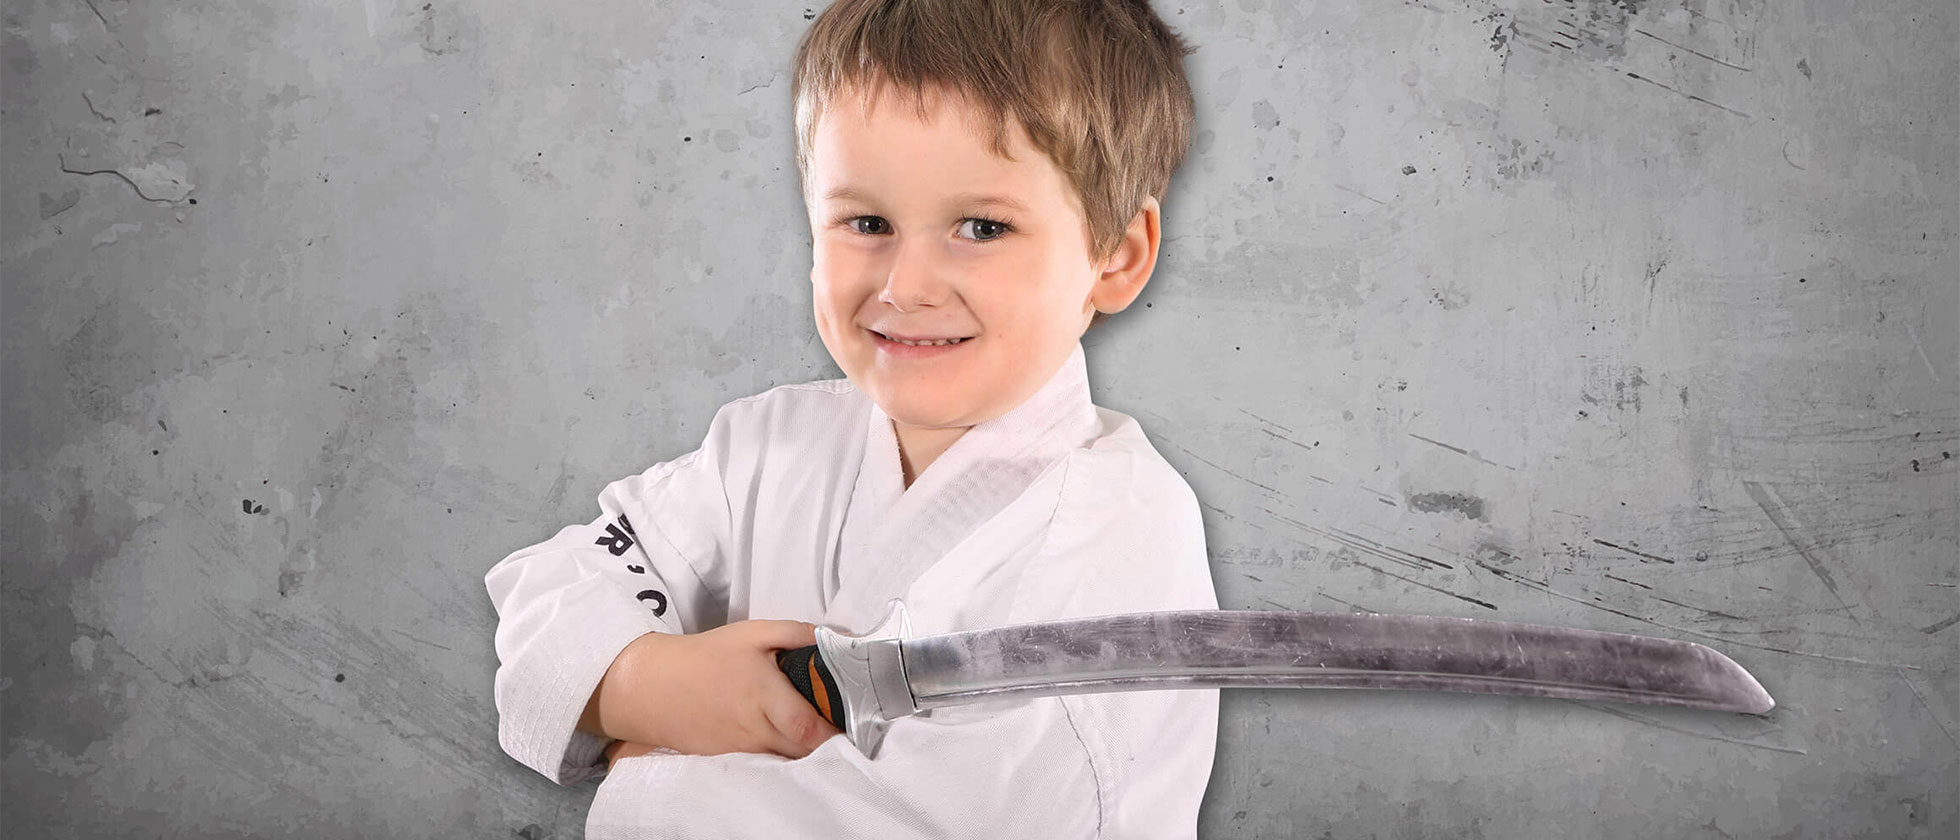 Kids Martial Arts In Lewis Center, Ohio for Ages 3-5